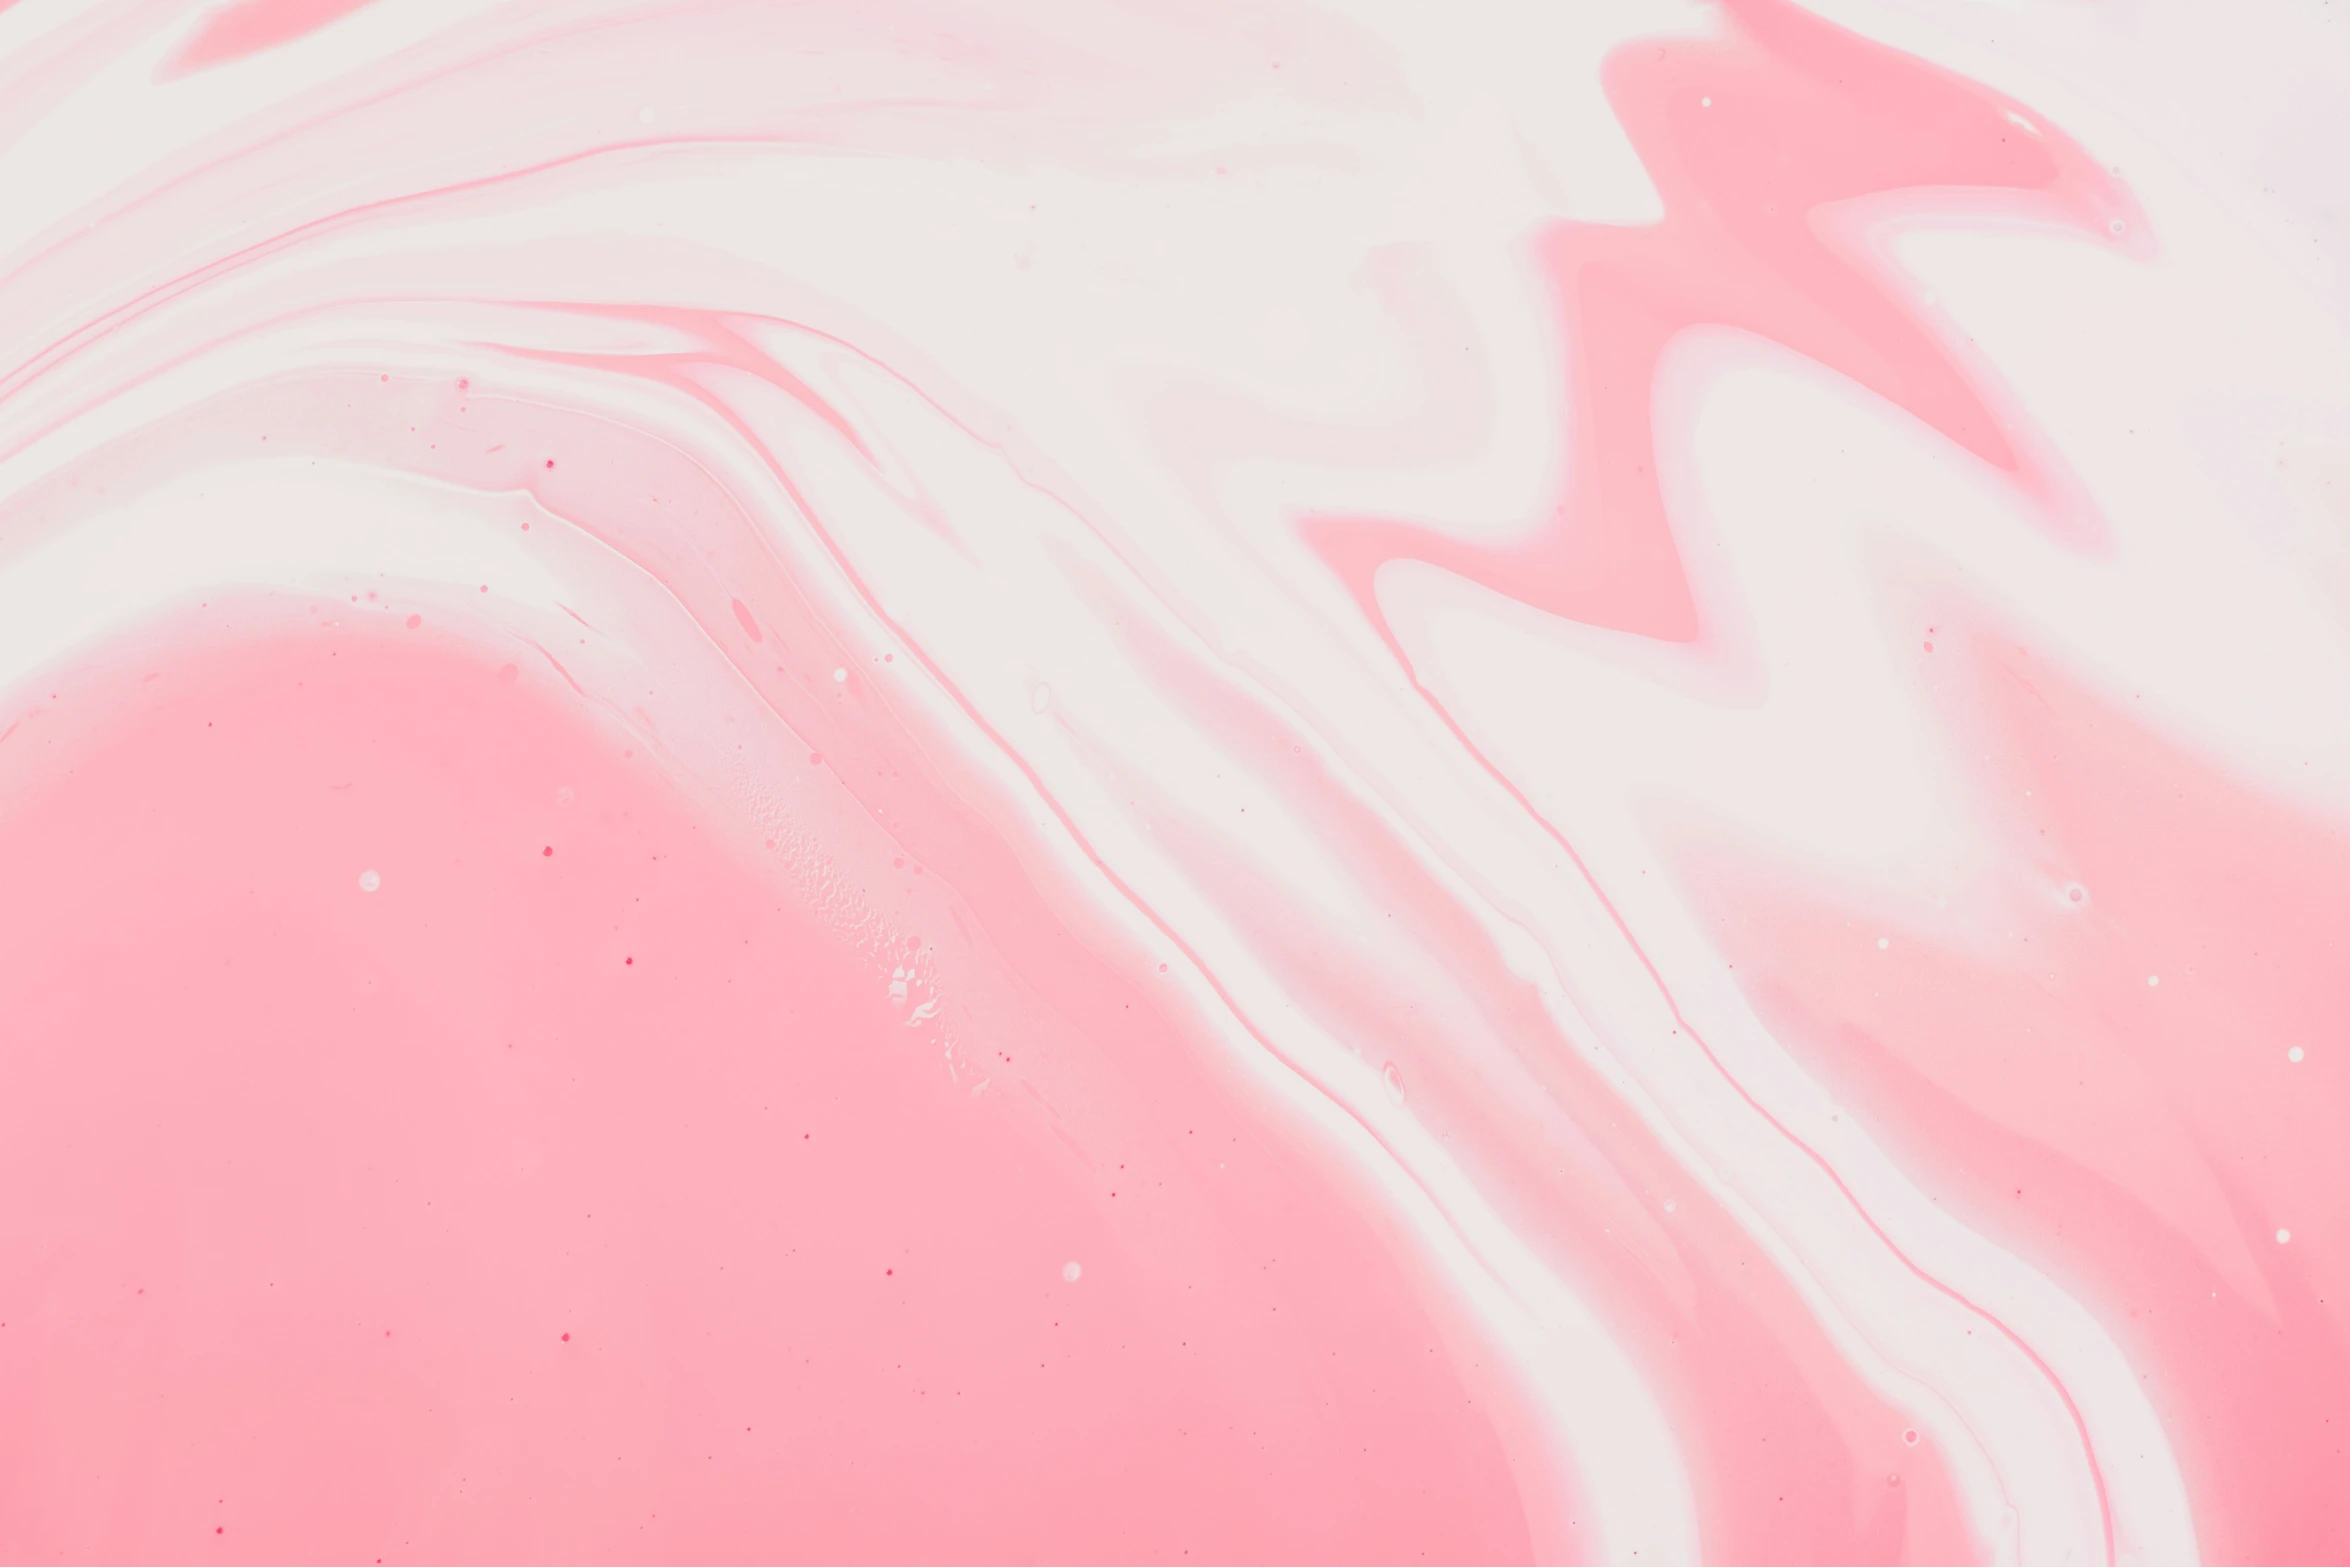 pink and white swirled liquid substance on white paper